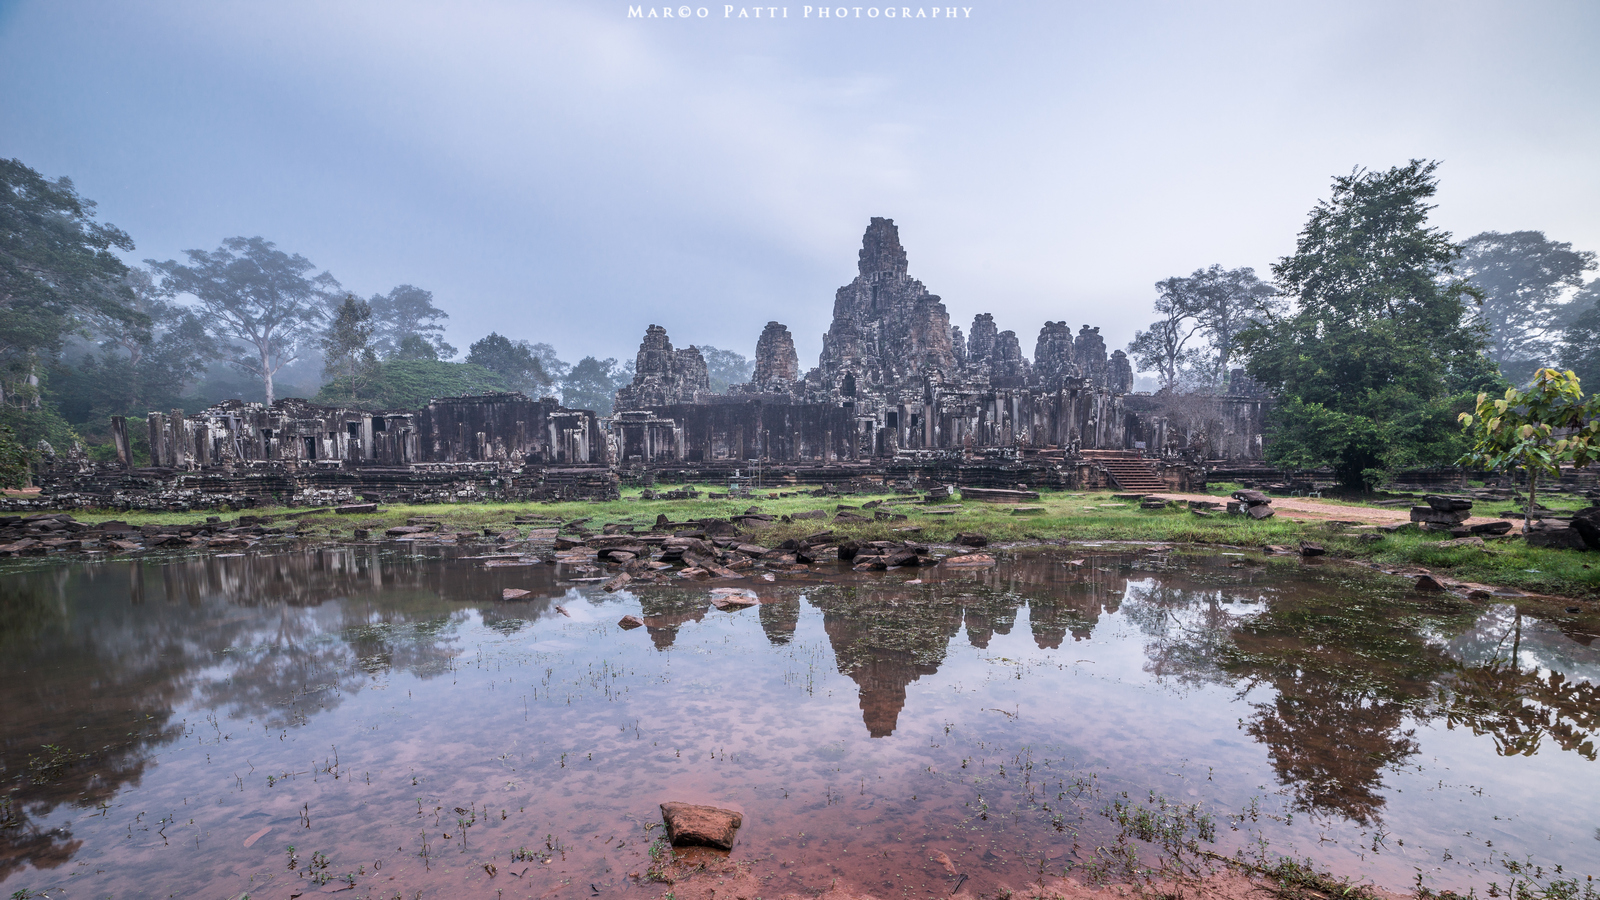 Loneliness at Bayon...